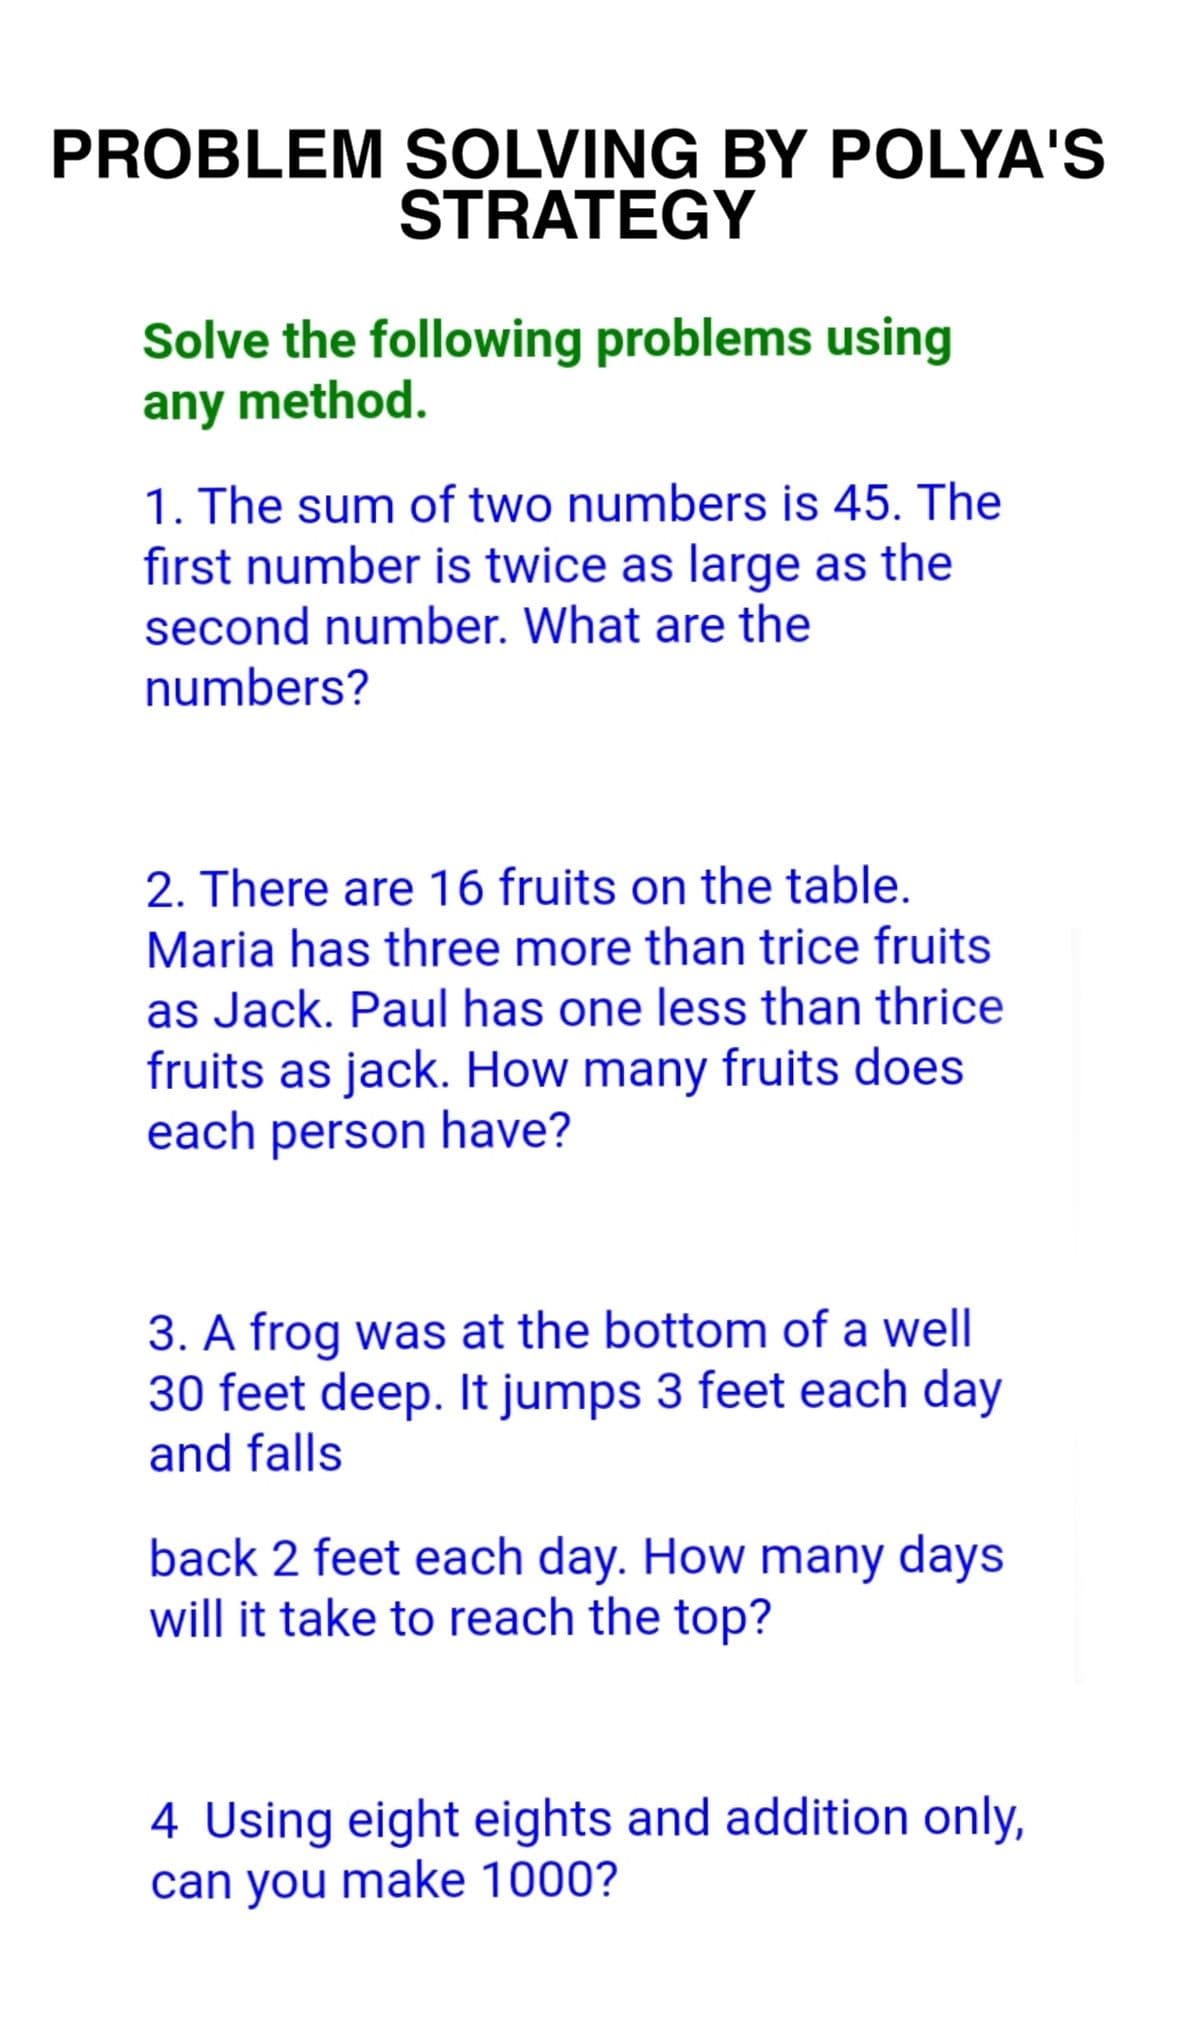 PROBLEM SOLVING BY POLYA'S
STRATEGY
Solve the following problems using
any method.
1. The sum of two numbers is 45. The
first number is twice as large as the
second number. What are the
numbers?
2. There are 16 fruits on the table.
Maria has three more than trice fruits
as Jack. Paul has one less than thrice
fruits as jack. How many fruits does
each person have?
3. A frog was at the bottom of a well
30 feet deep. It jumps 3 feet each day
and falls
back 2 feet each day. How many days
will it take to reach the top?
4 Using eight eights and addition only,
can you make 1000?
